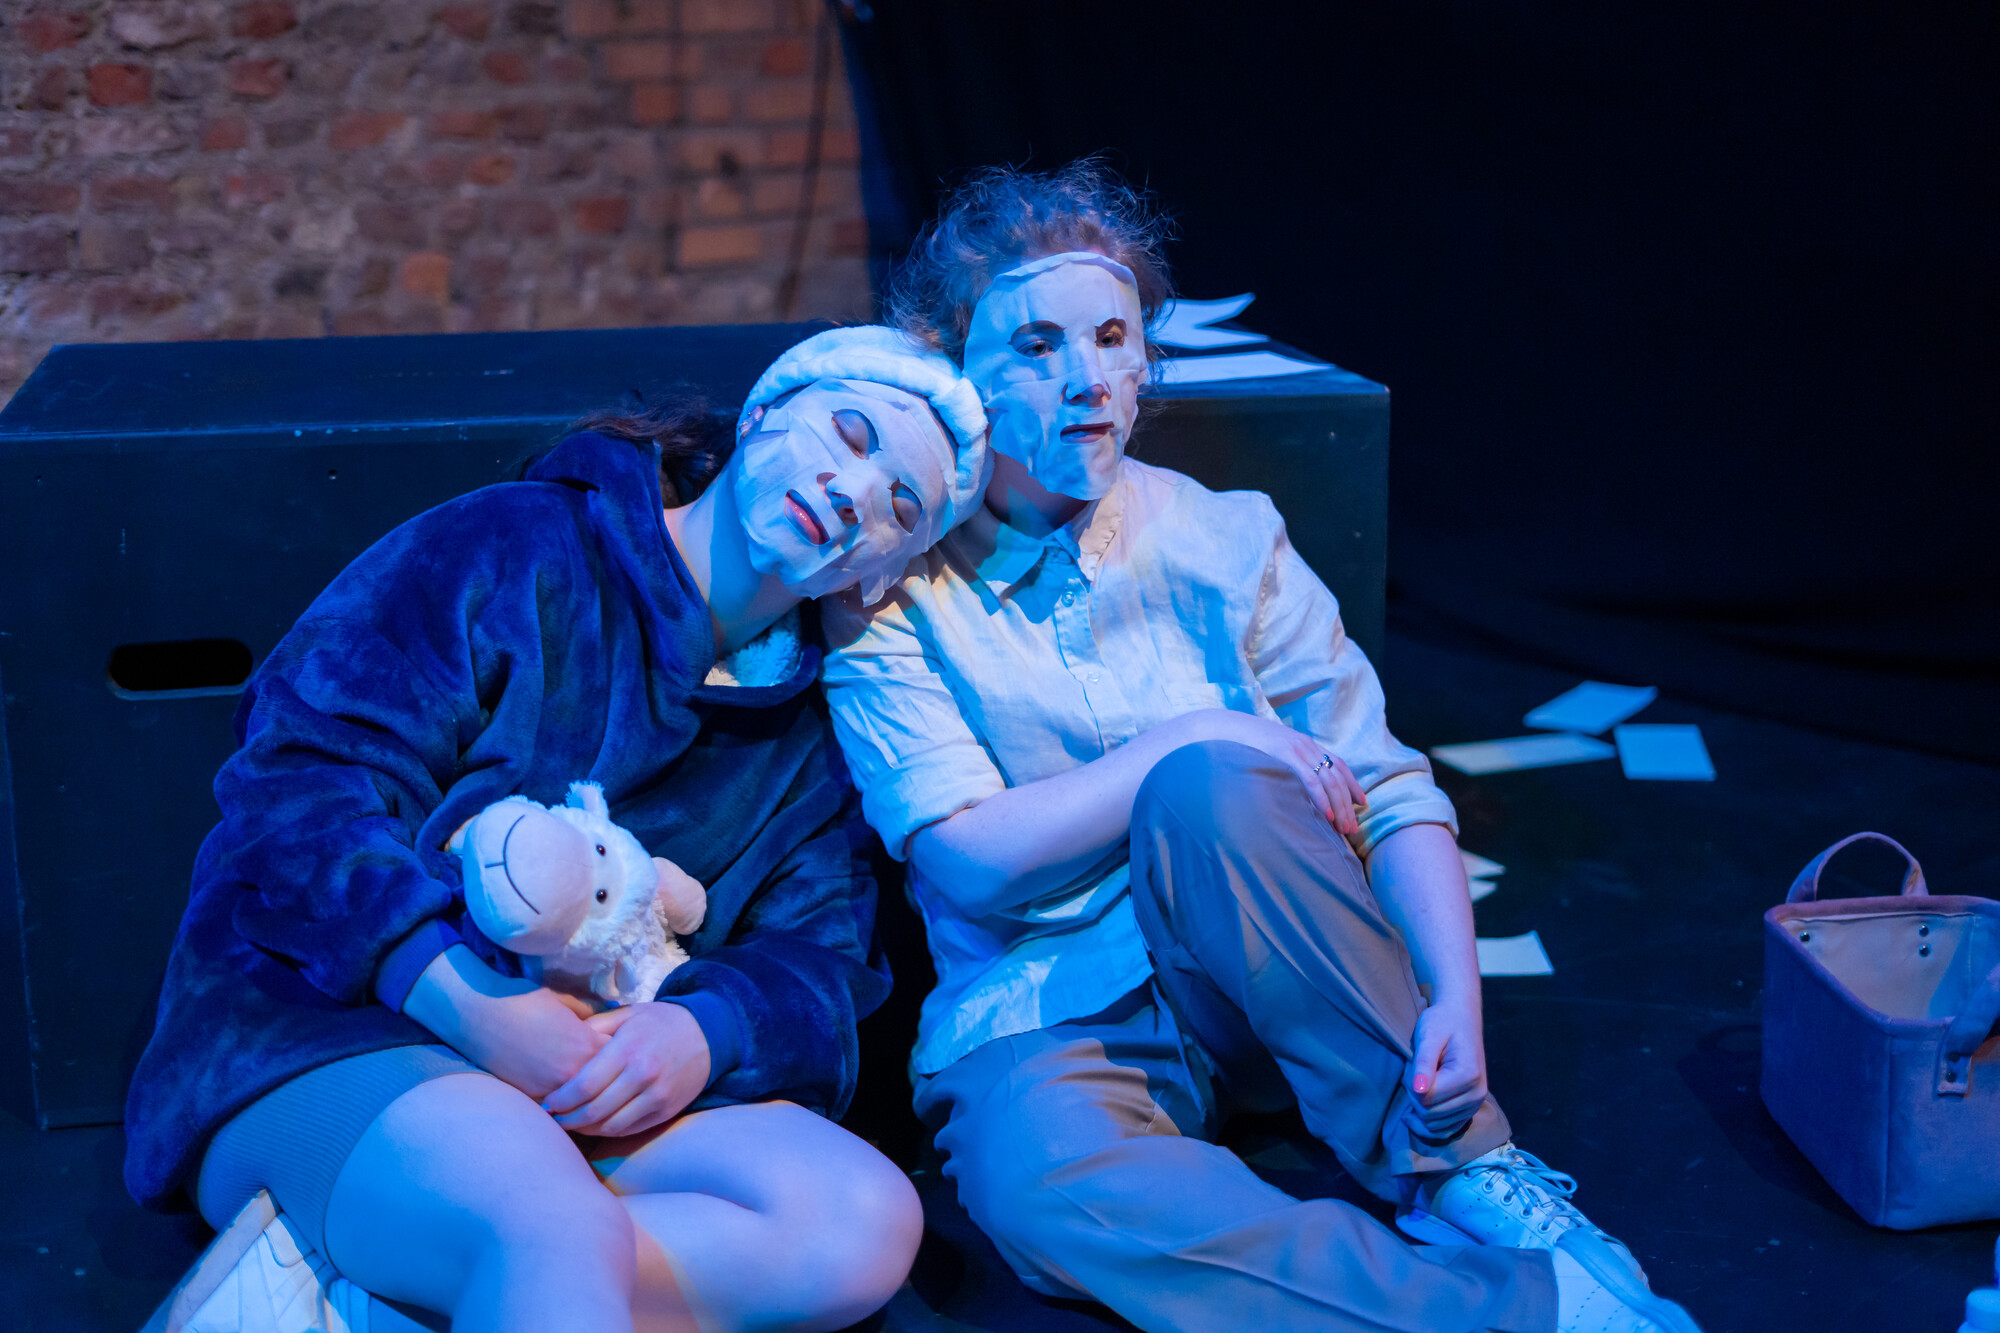 Two actors wearing face masks sit and cuddle together on stage.